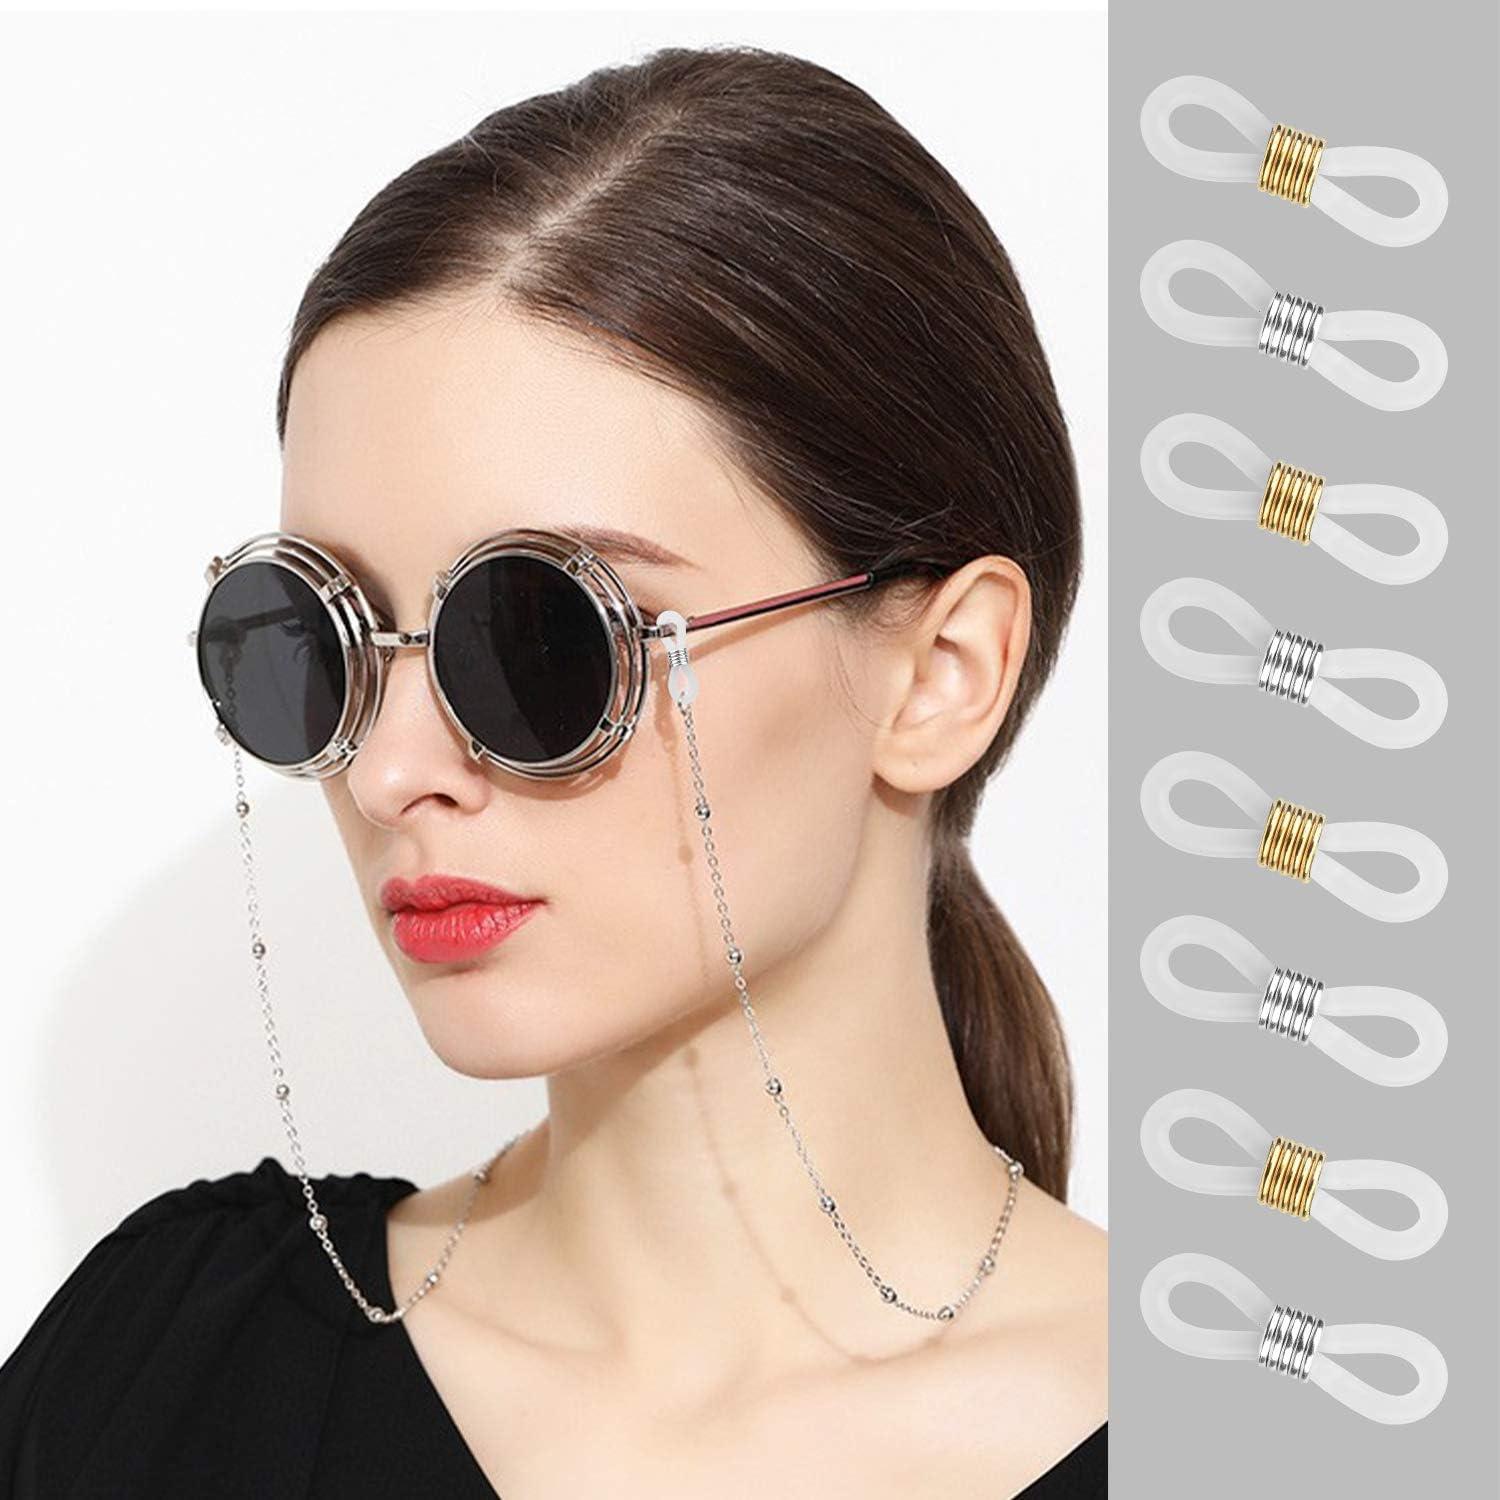 HUIHUIBAO 20 Pieces Eyeglass Chain Ends Adjustable Spring Rubber Ends  Connectors for Eye Glasses Holder Necklace Chain Strap Gold and Silver Ring  (Clear)